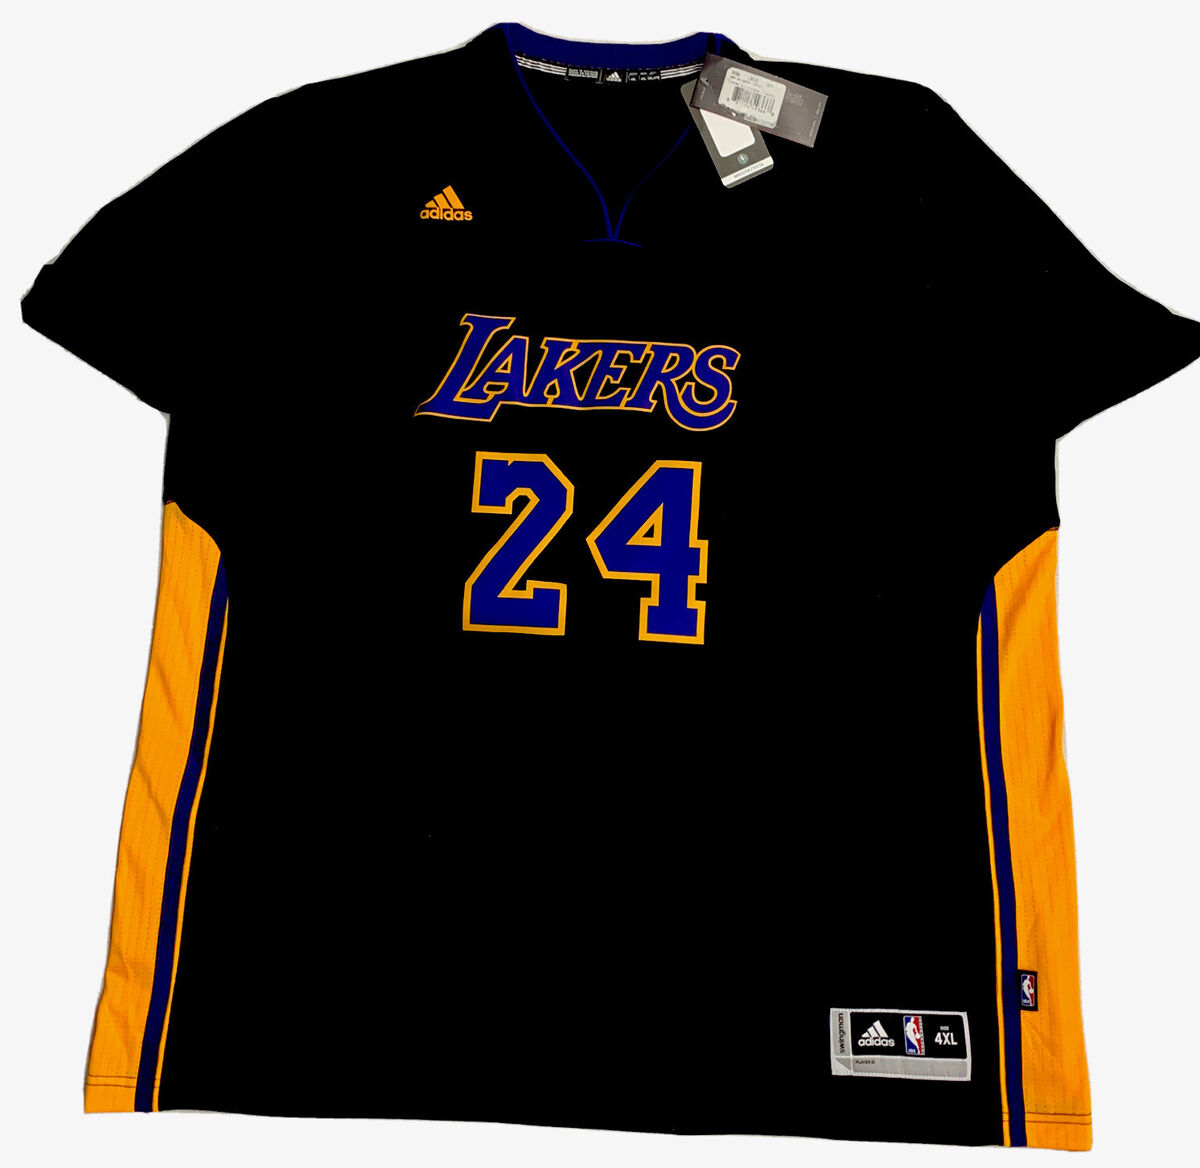 SNKR_TWITR on X: $208 each for the Mitchell and Ness Kobe Bryant